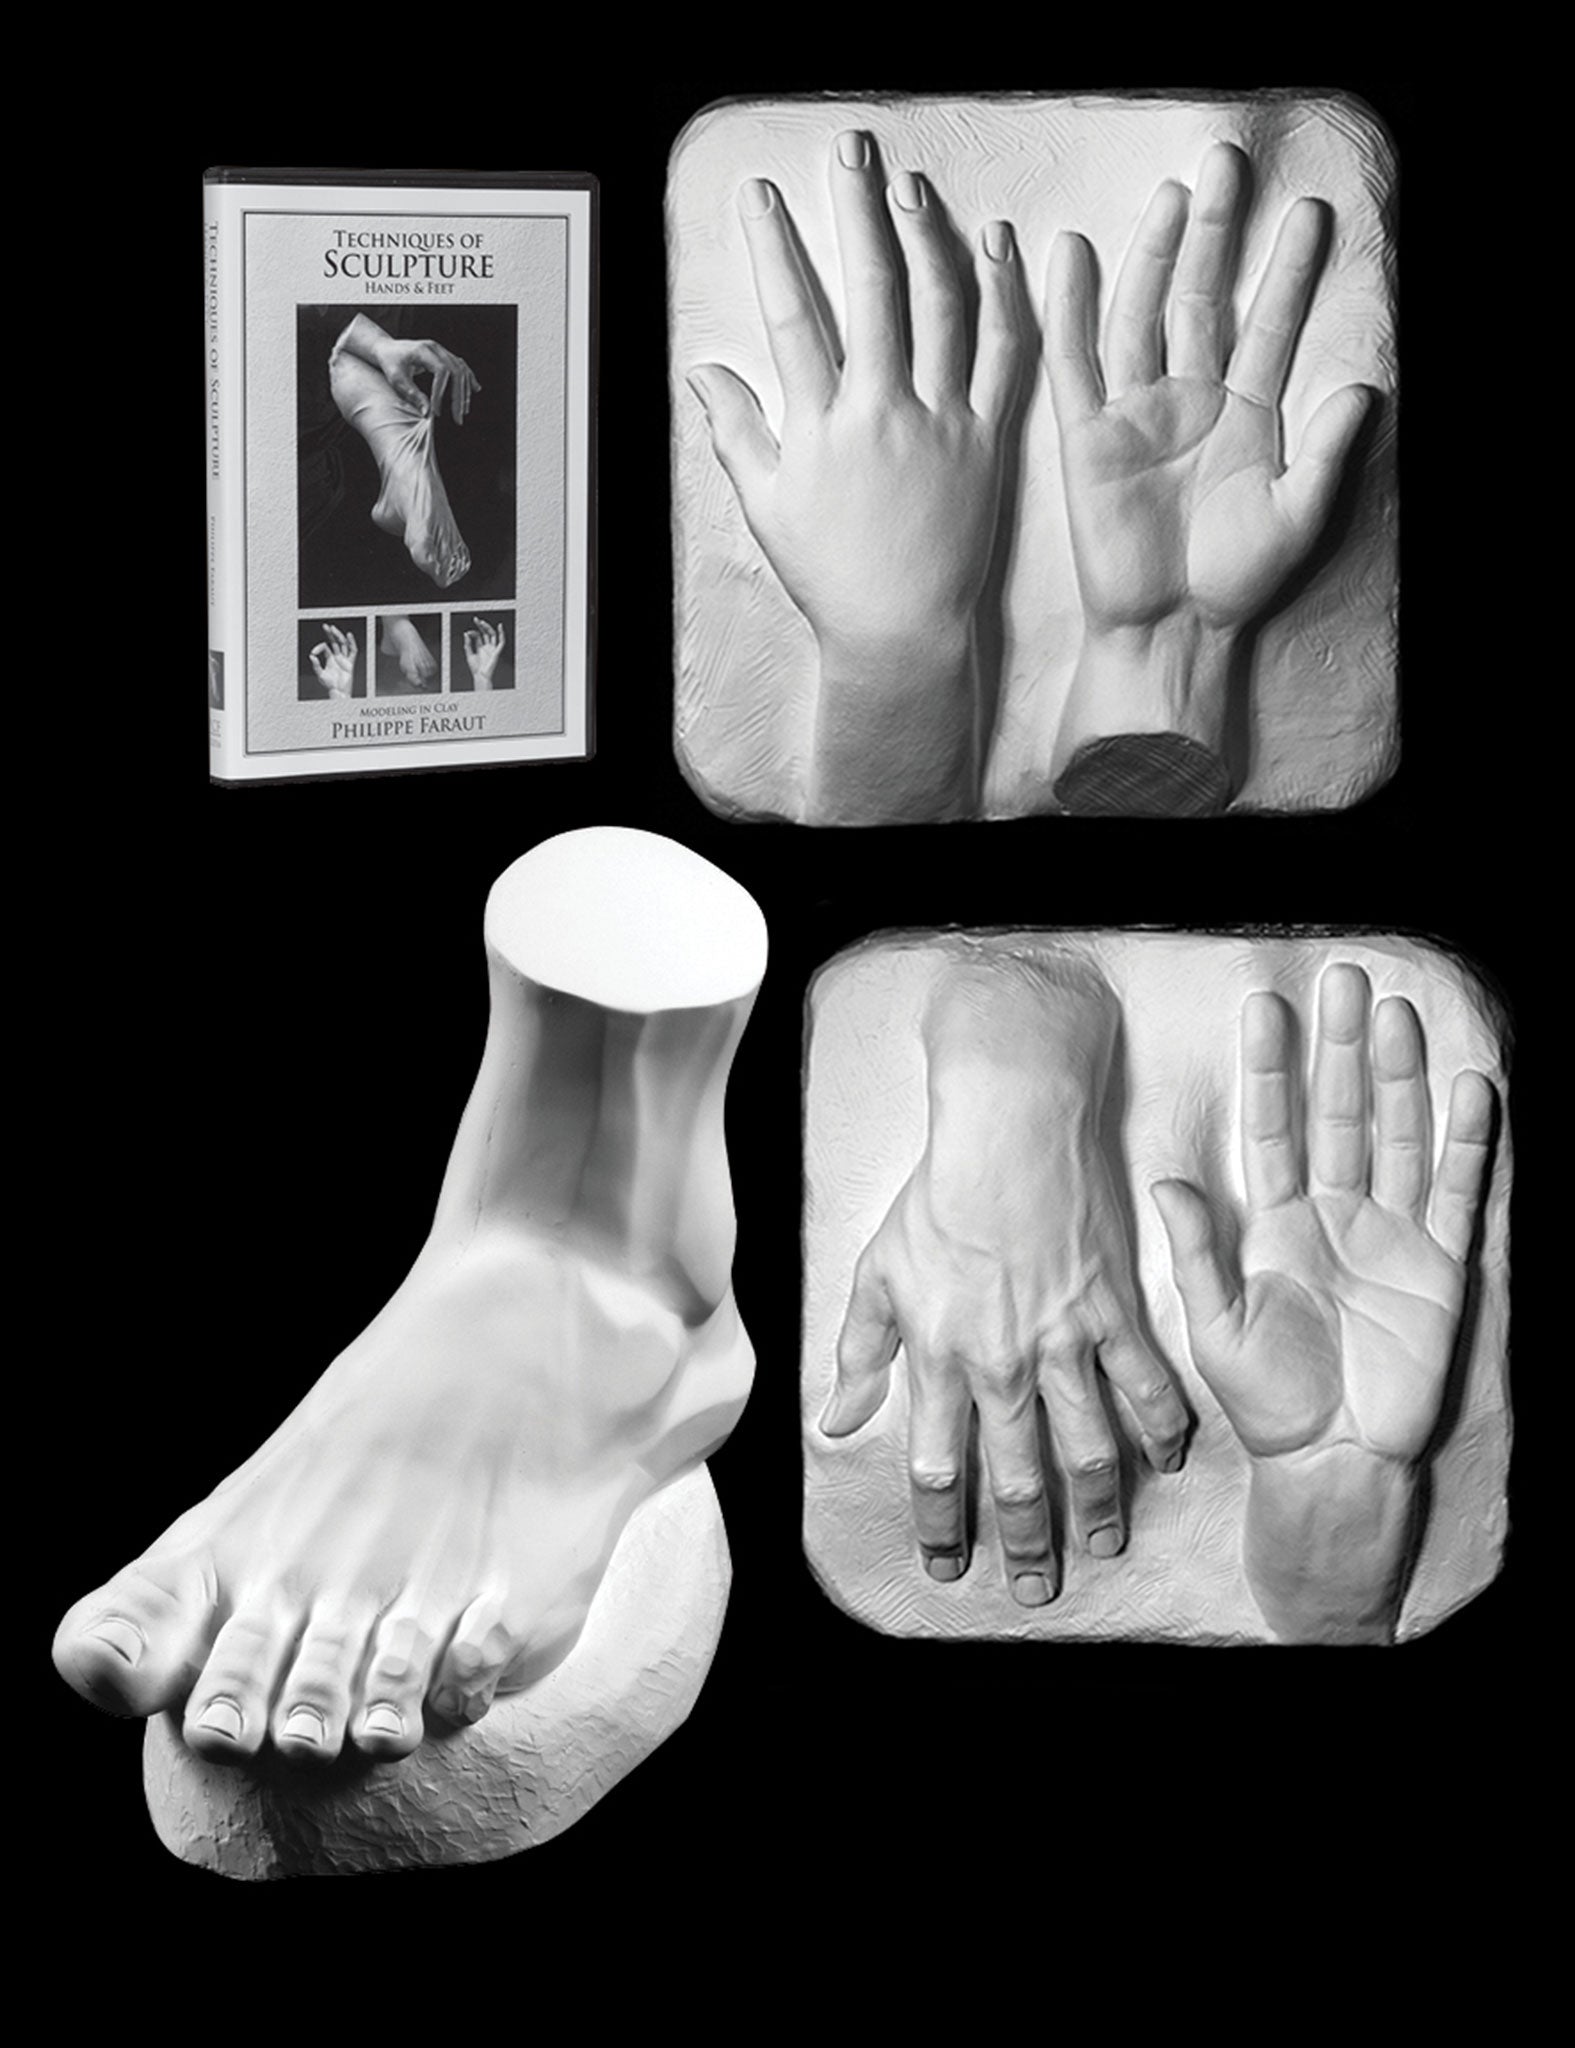 sculpting hands and feet dvd and plaster cast set by Faraut